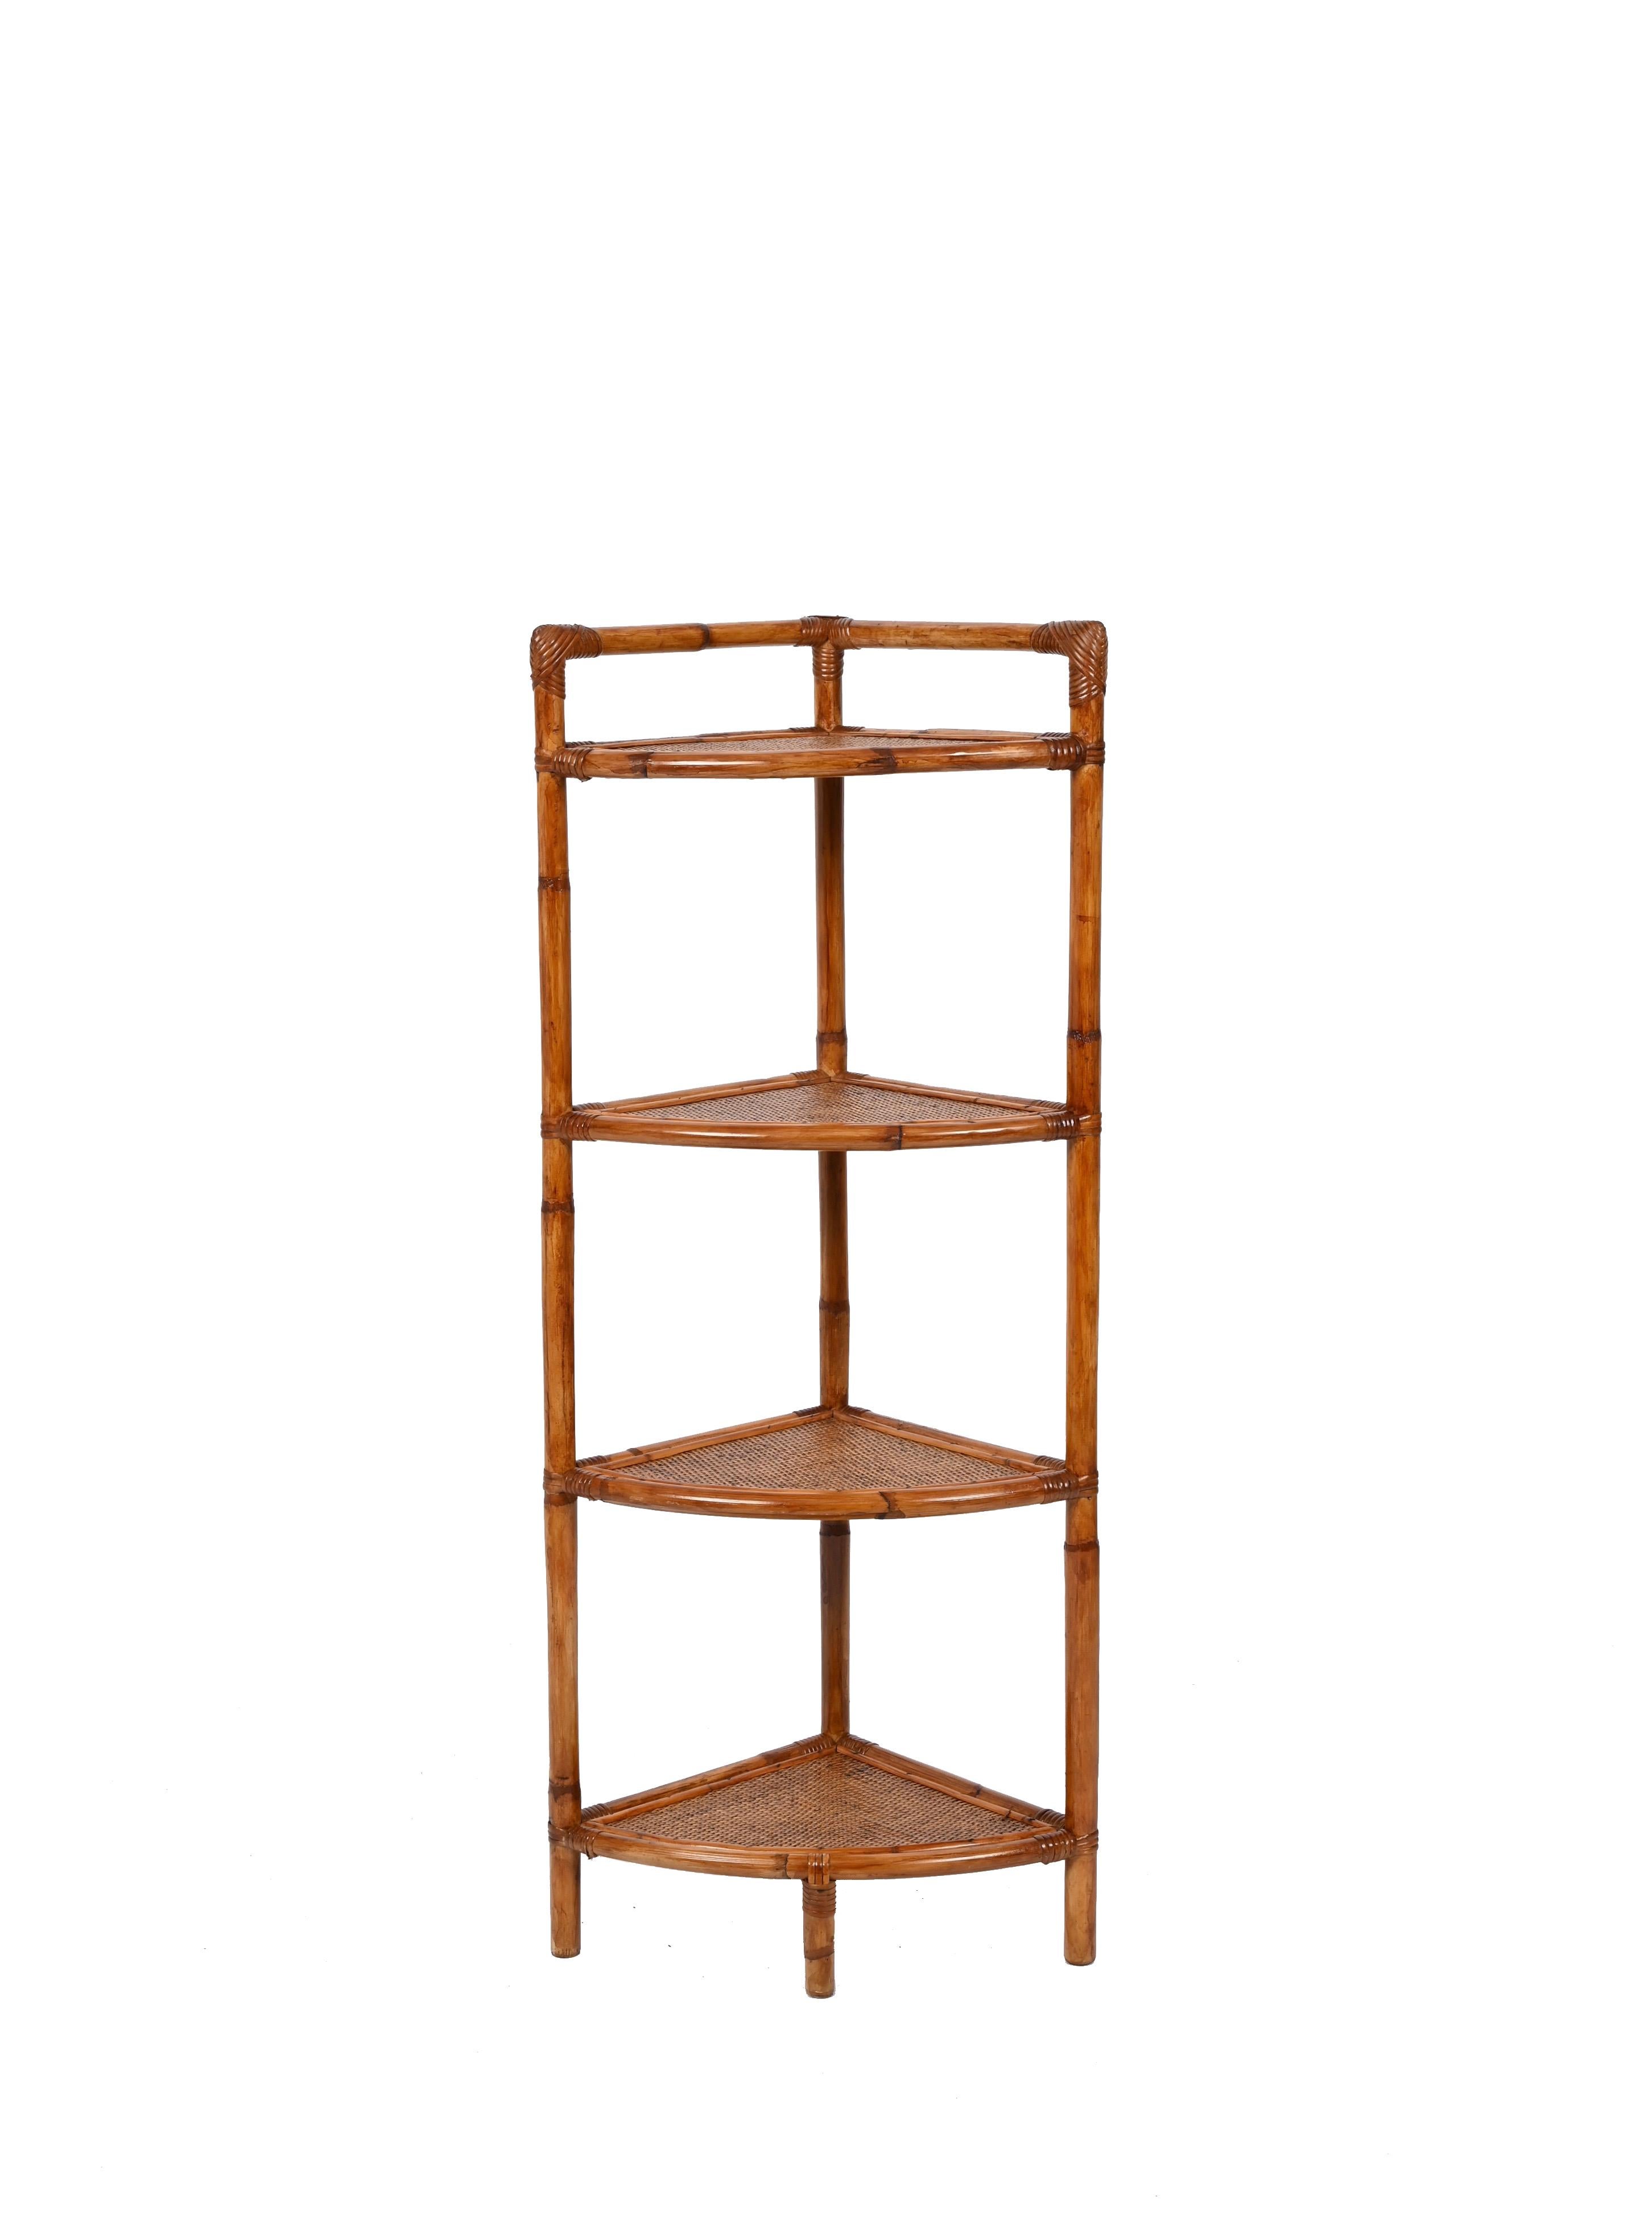 Amazing midcentury triangular bamboo and rattan corner bookcase shelves. Franco Albini inspired the design of this piece, produced is in Italy during the 1970s.

This piece is fantastic thanks to its bamboo triangular structure with stunning